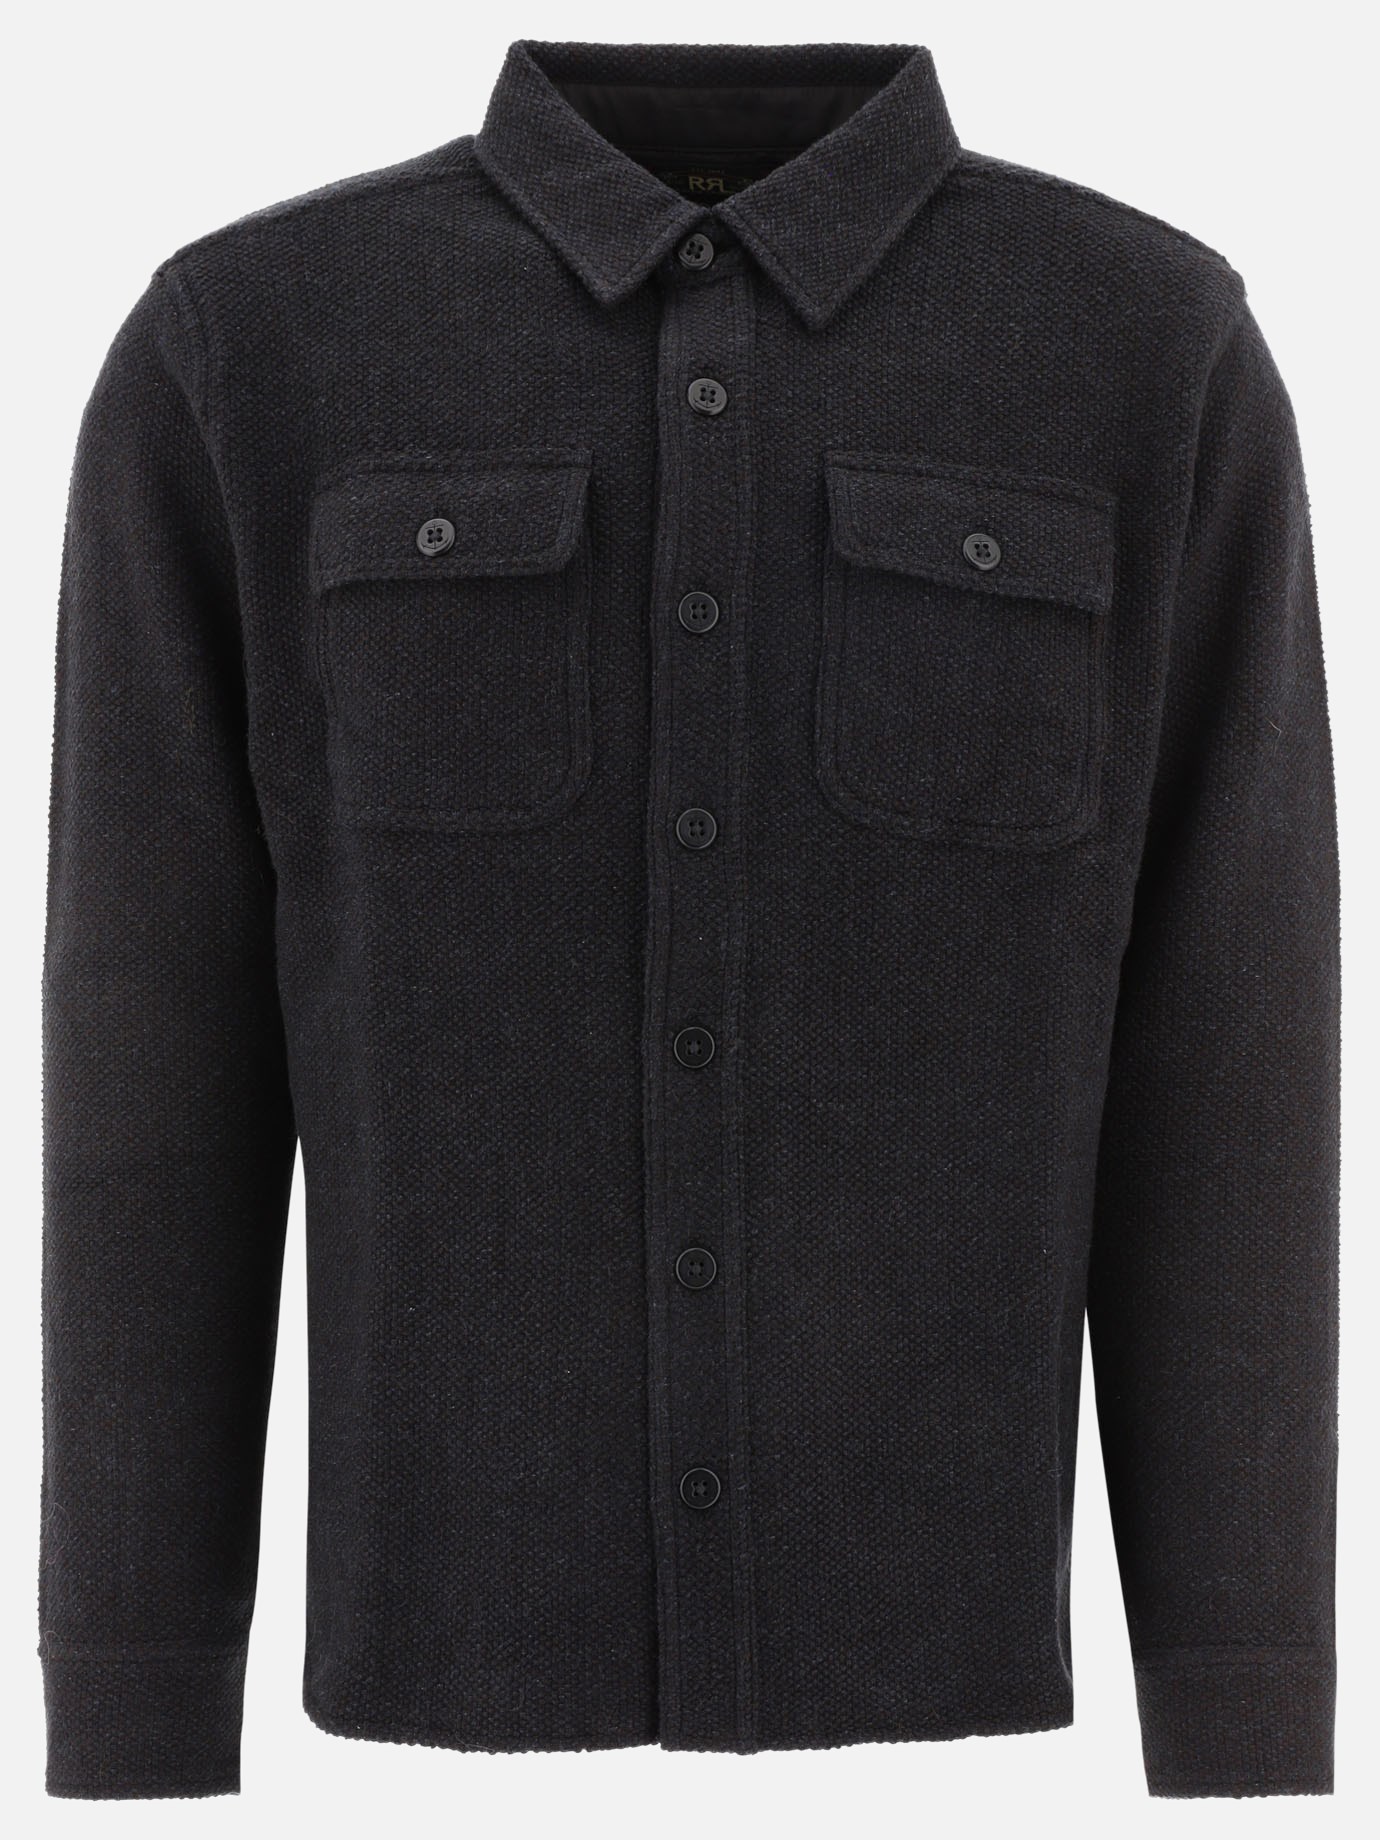 Overshirt in magliaby RRL by Ralph Lauren - 5